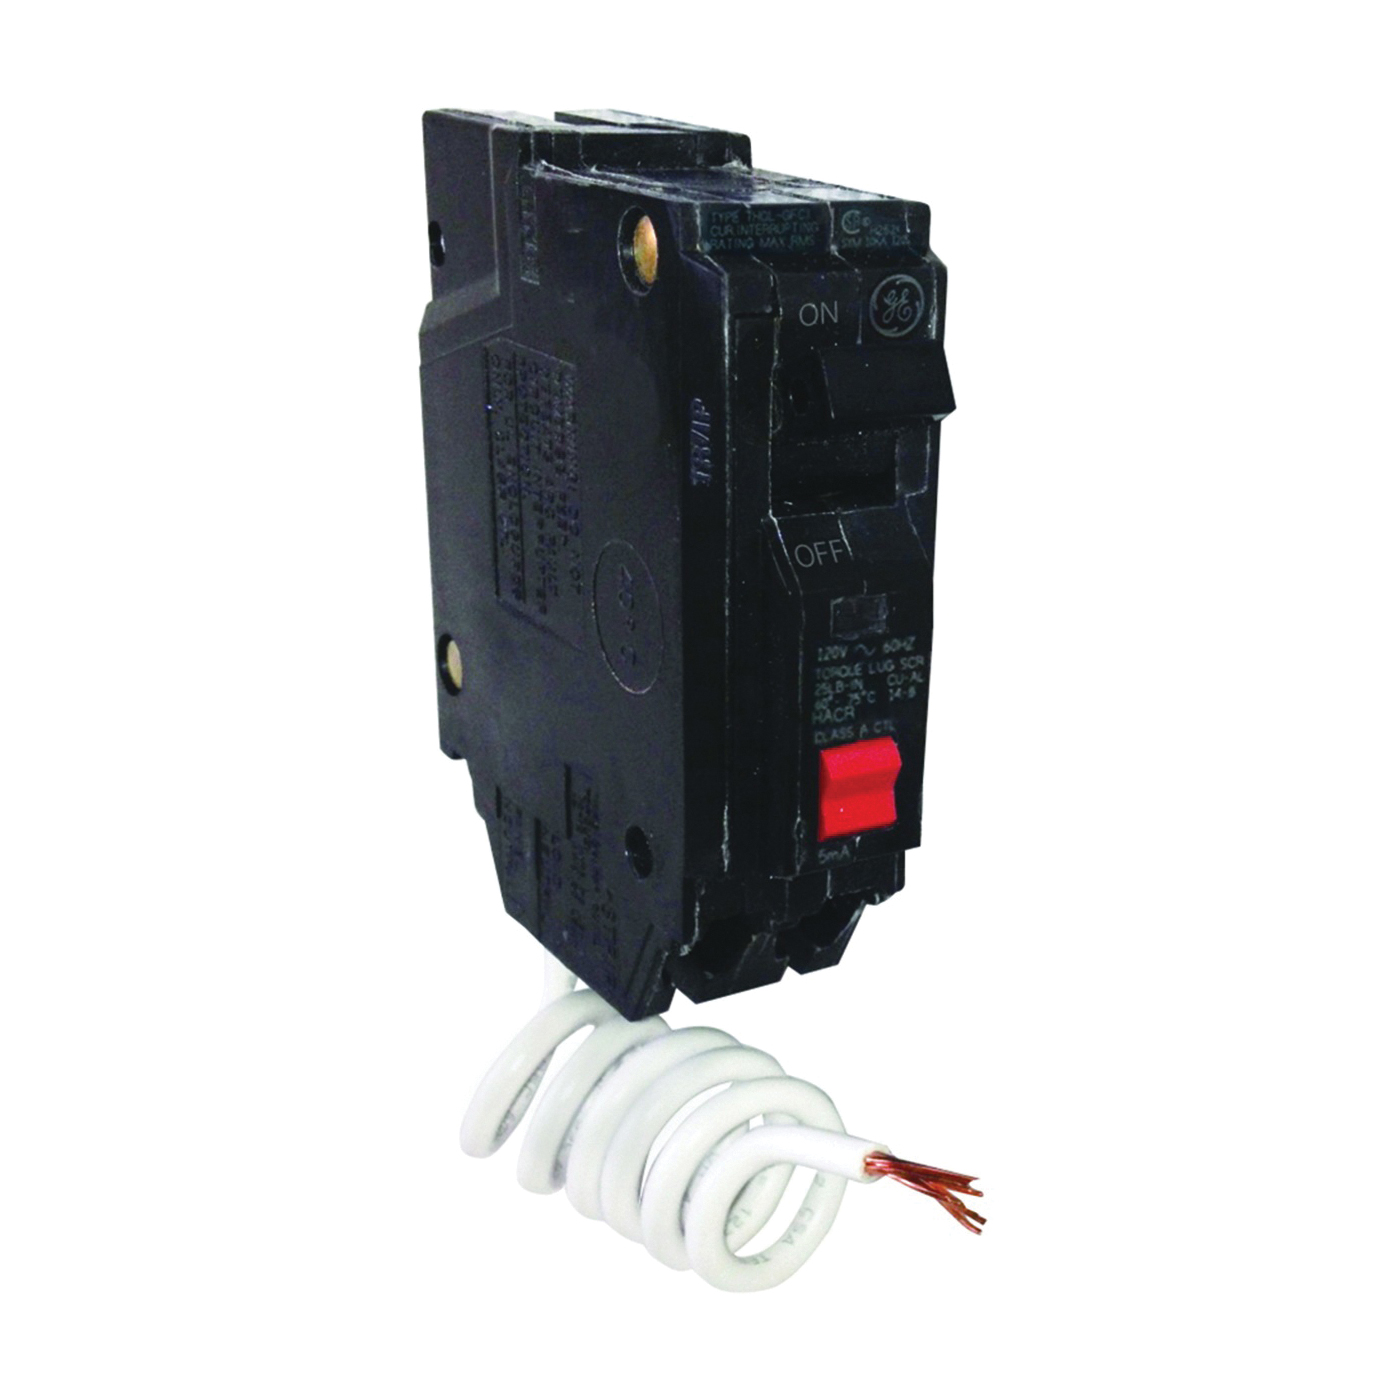 THQL1120GFTP Feeder Circuit Breaker, Thermal Magnetic, 20 A, 1 -Pole, 120 V, Plug Mounting